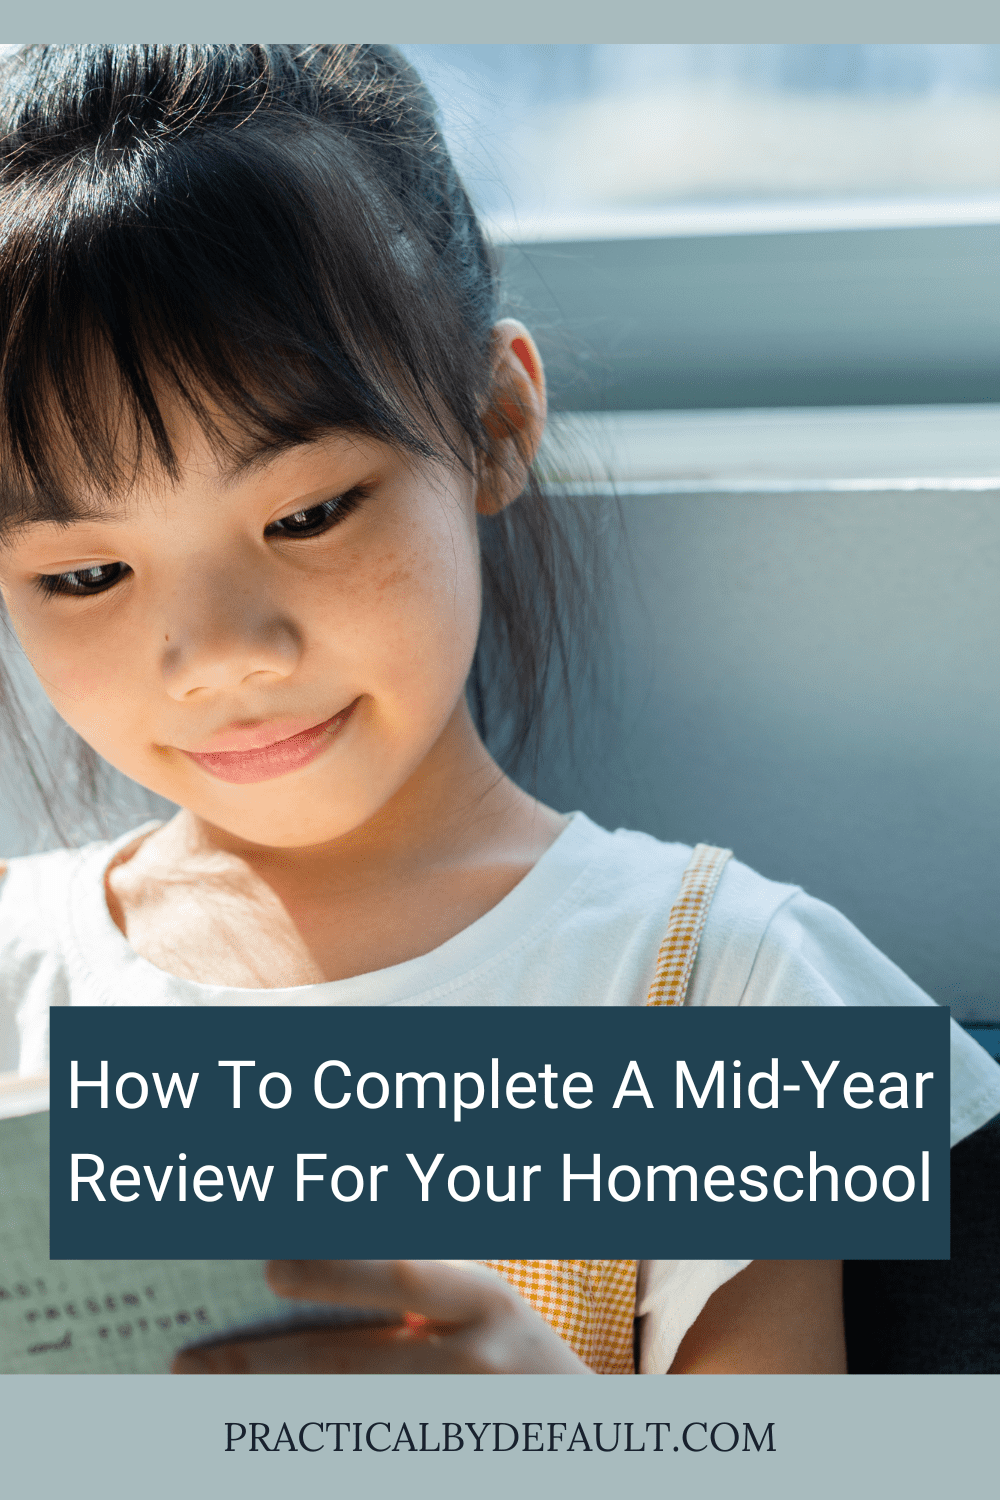 How To Complete A Mid-Year Review For Your Homeschool